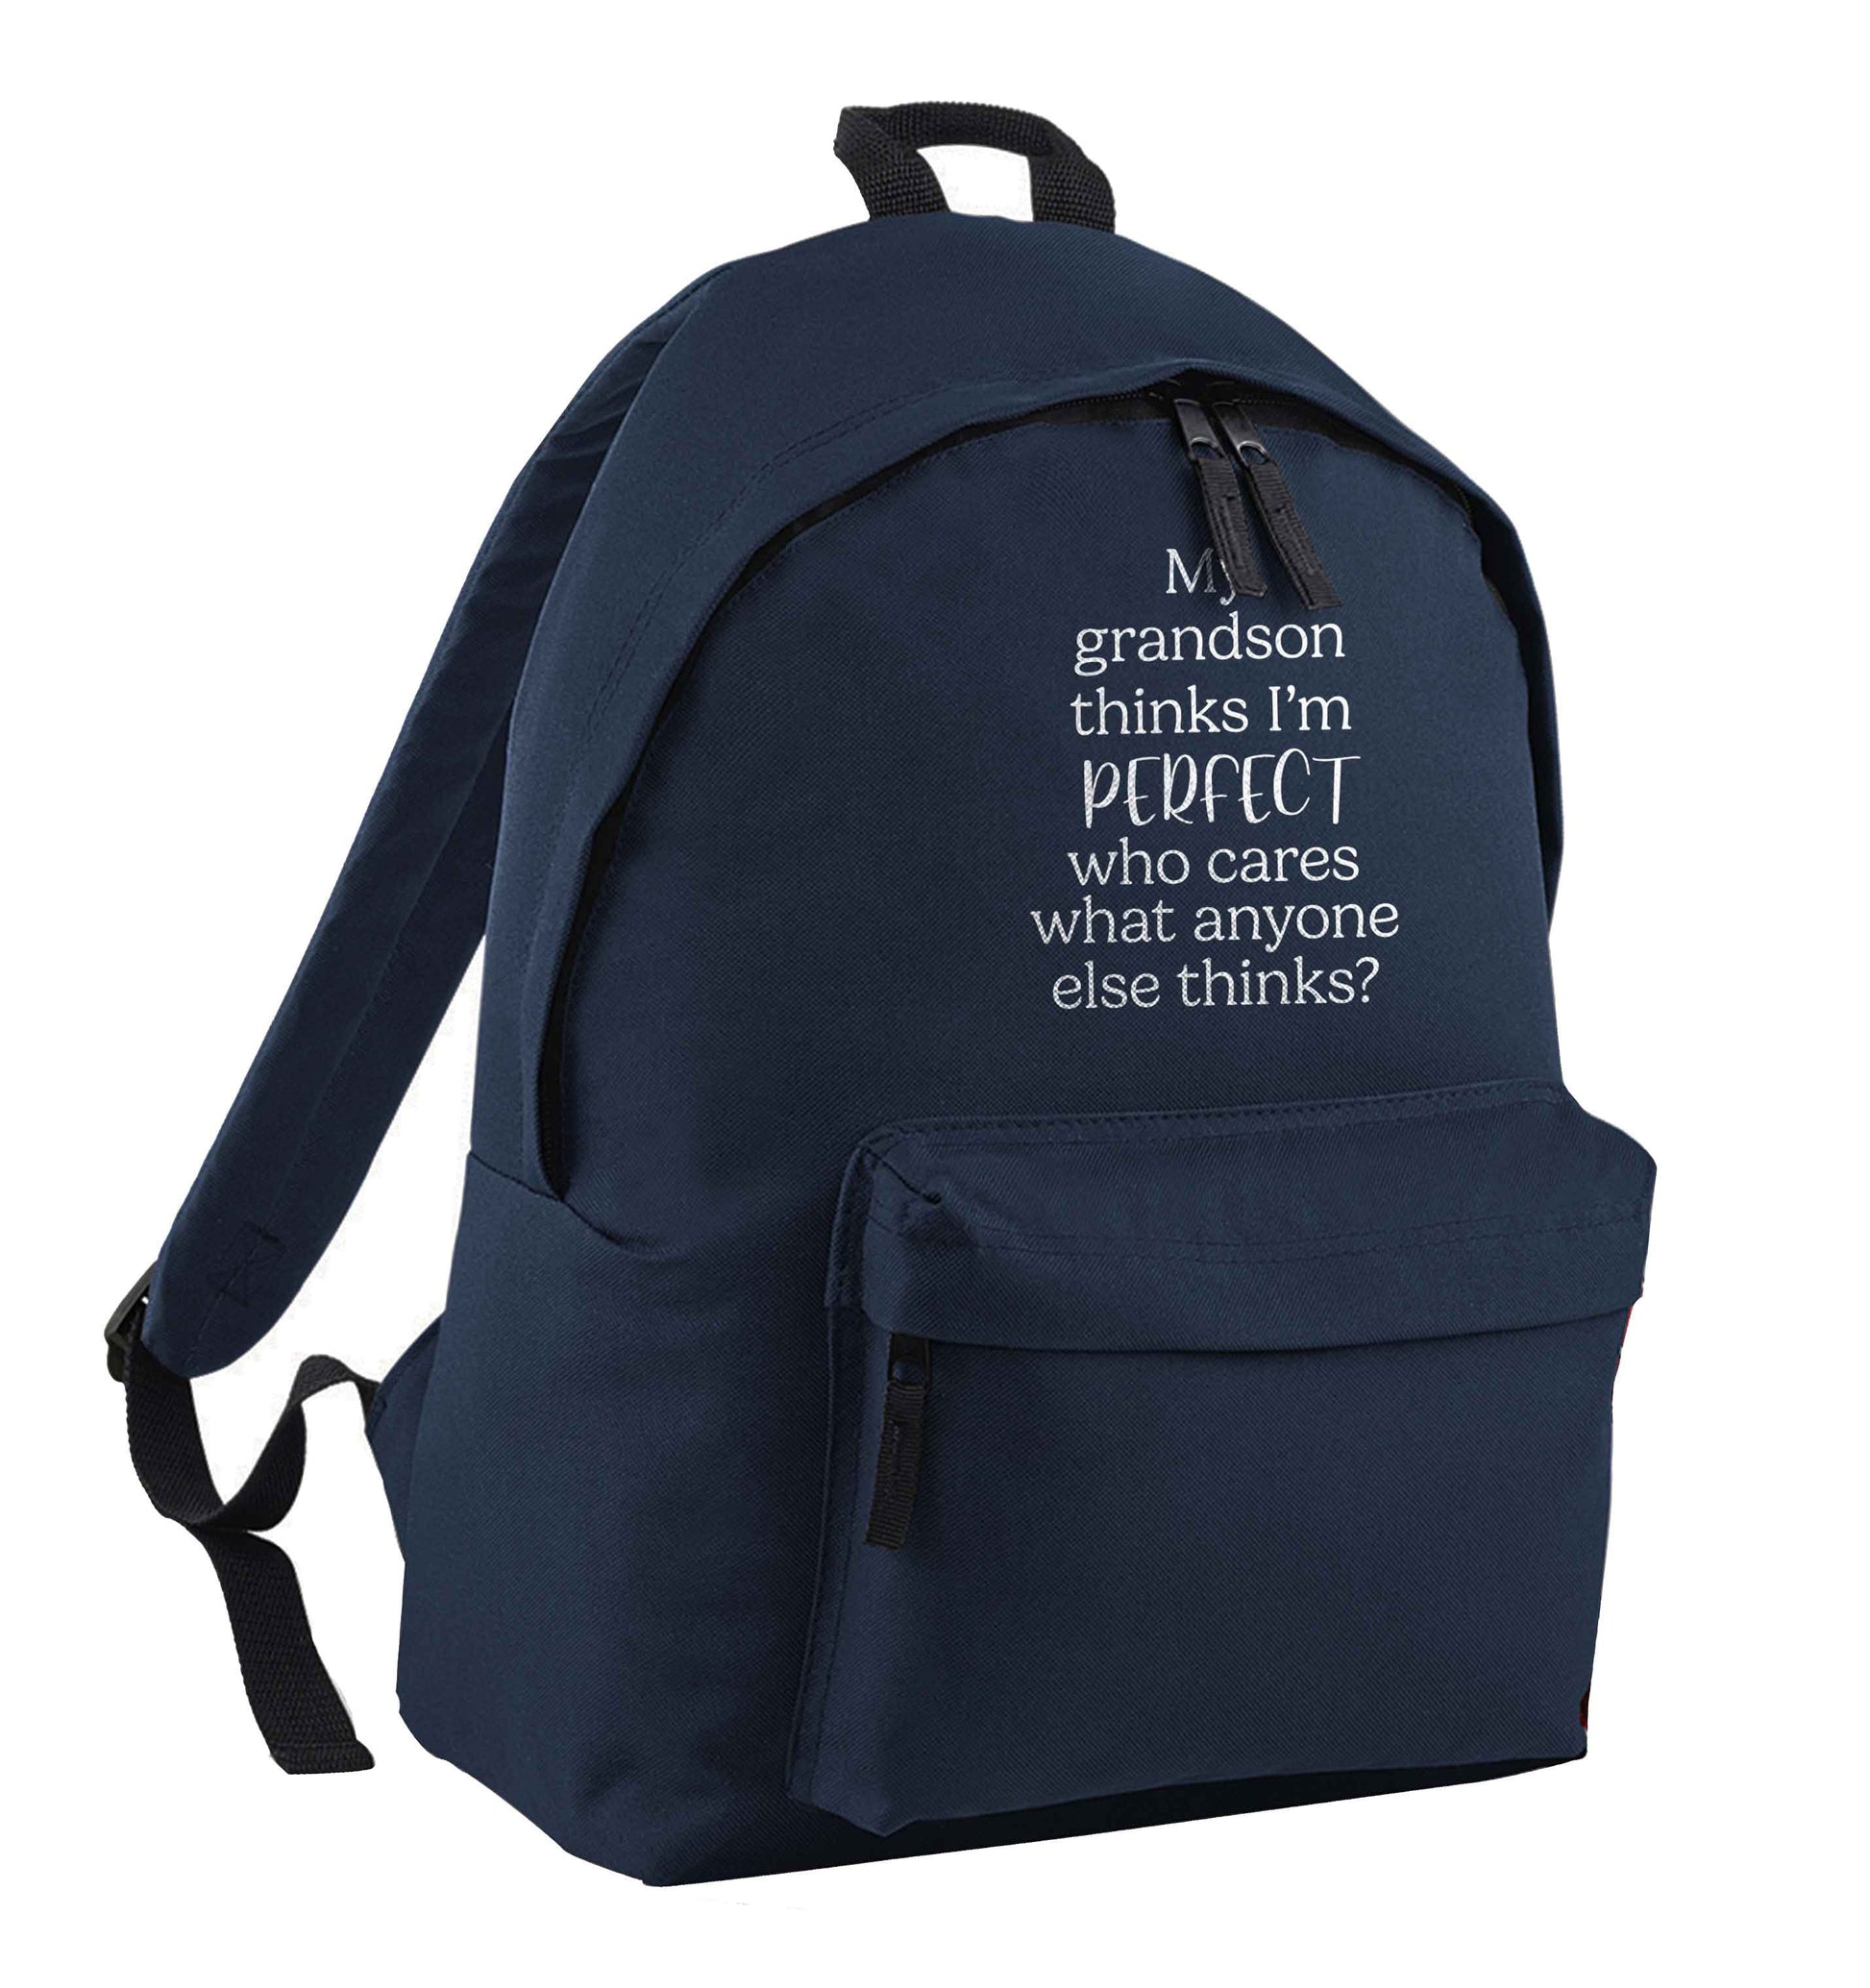 My Grandson thinks I'm perfect who cares what anyone else thinks? navy adults backpack